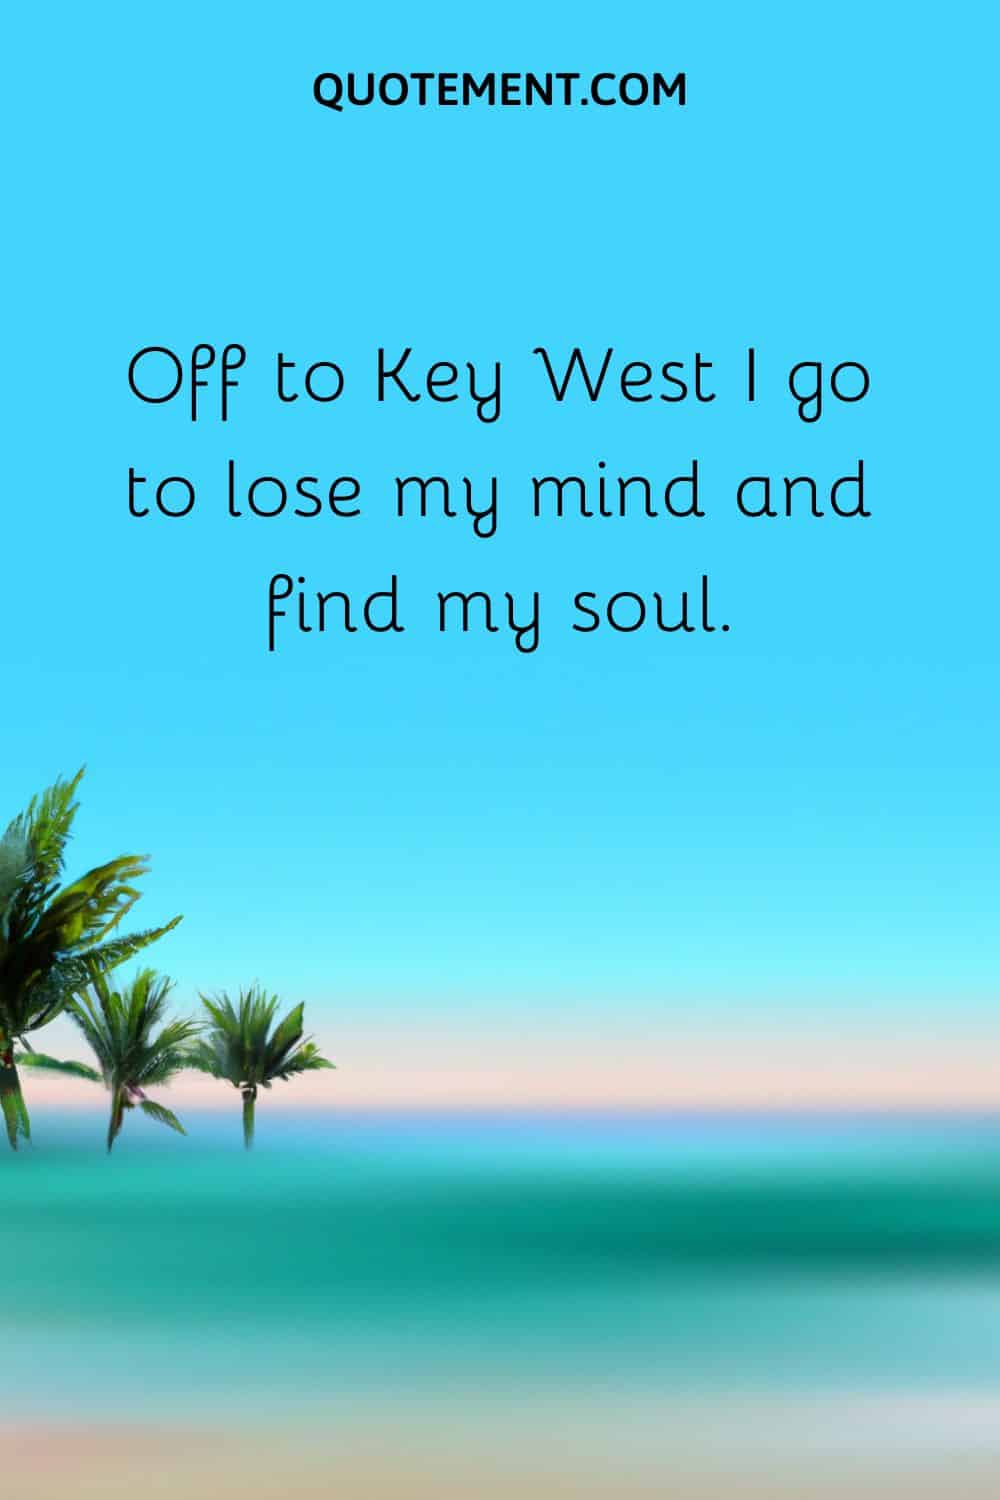 Off to Key West I go to lose my mind and find my soul